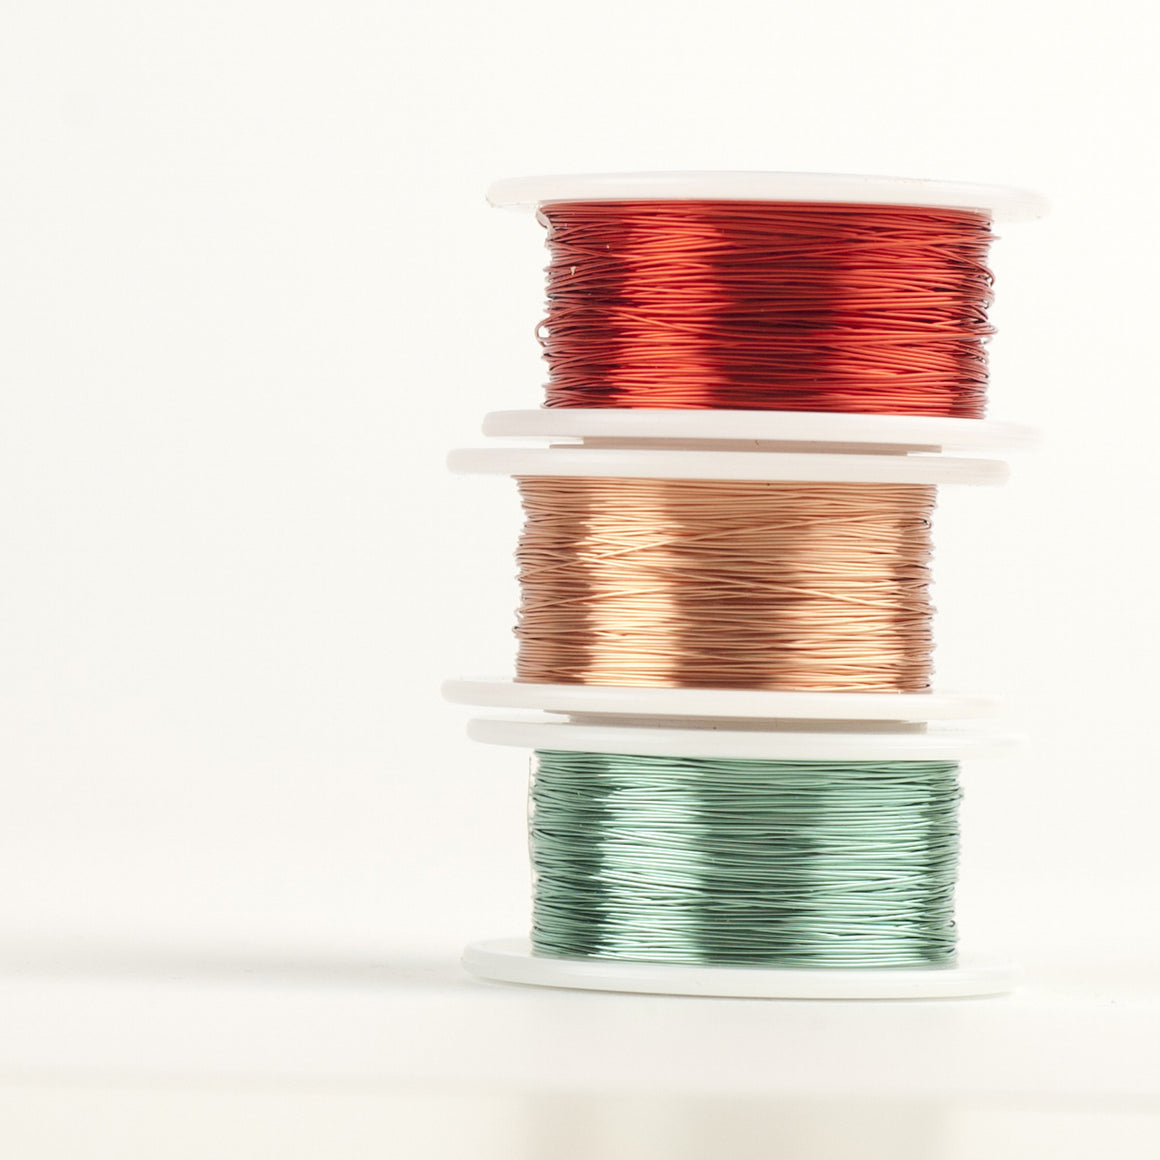 Craft Wire -  Spring 2016 colors - Extra long 3 spools - 120 feet each - Yooladesign